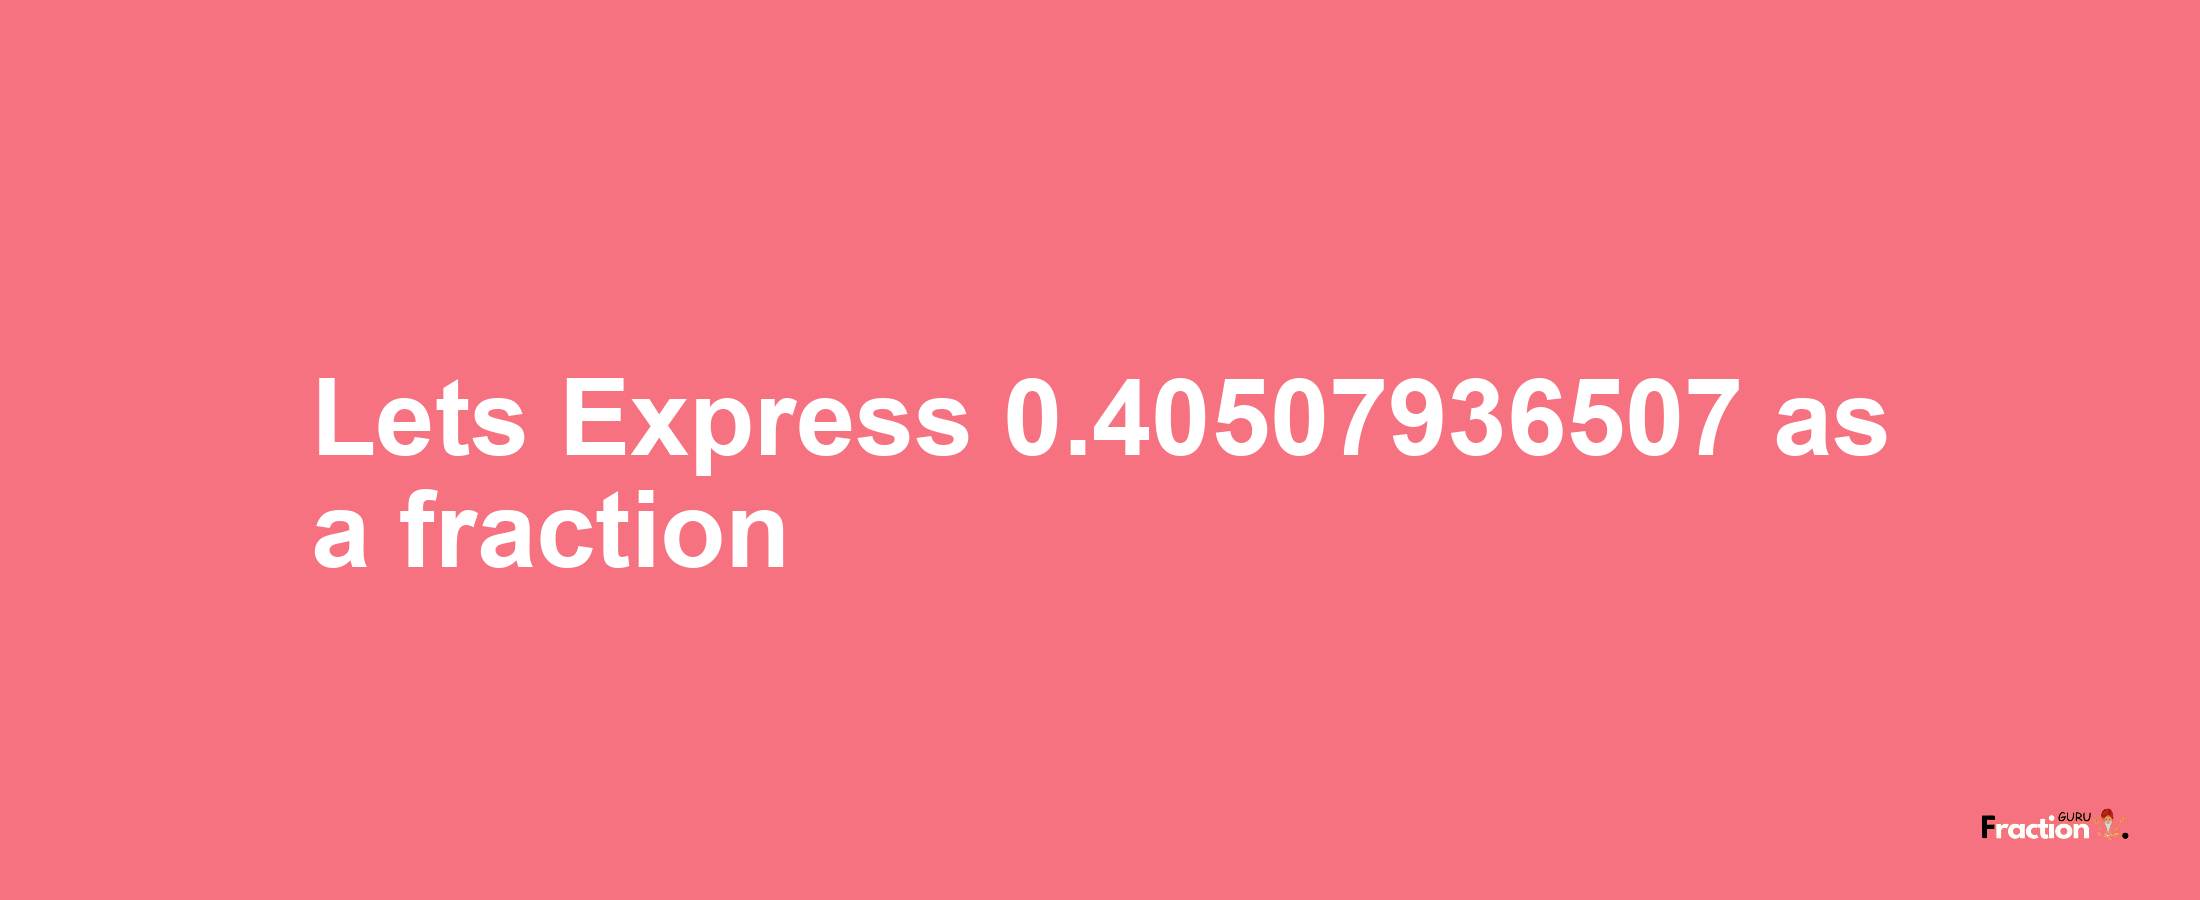 Lets Express 0.40507936507 as afraction